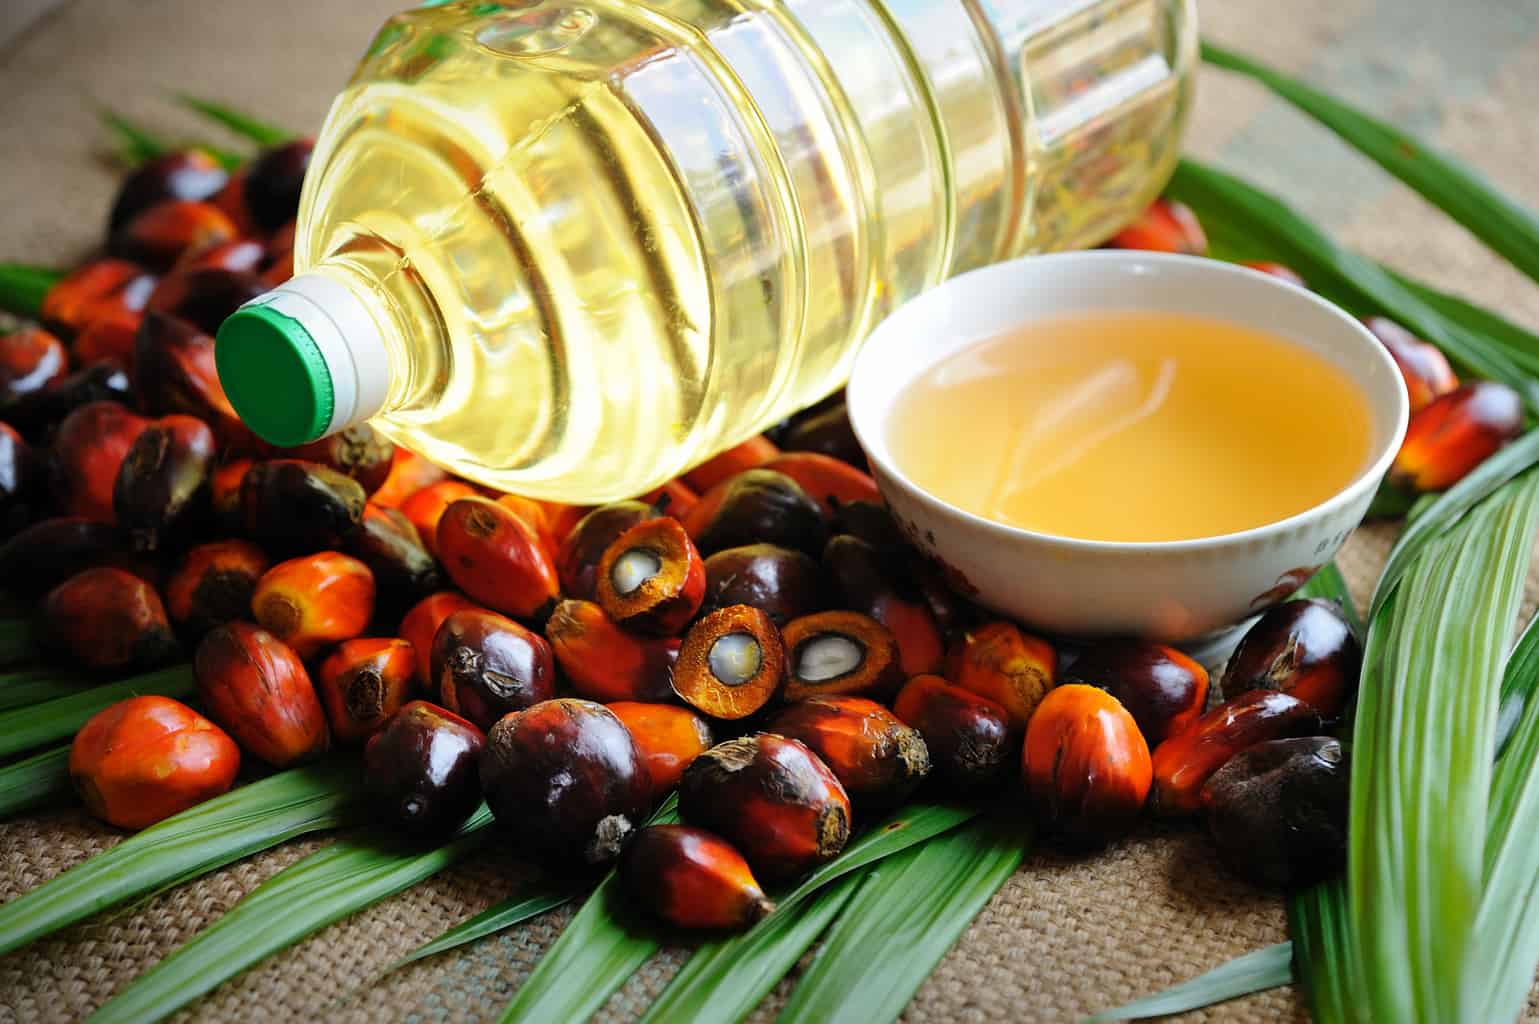 This oil protects your heart from bad fat.